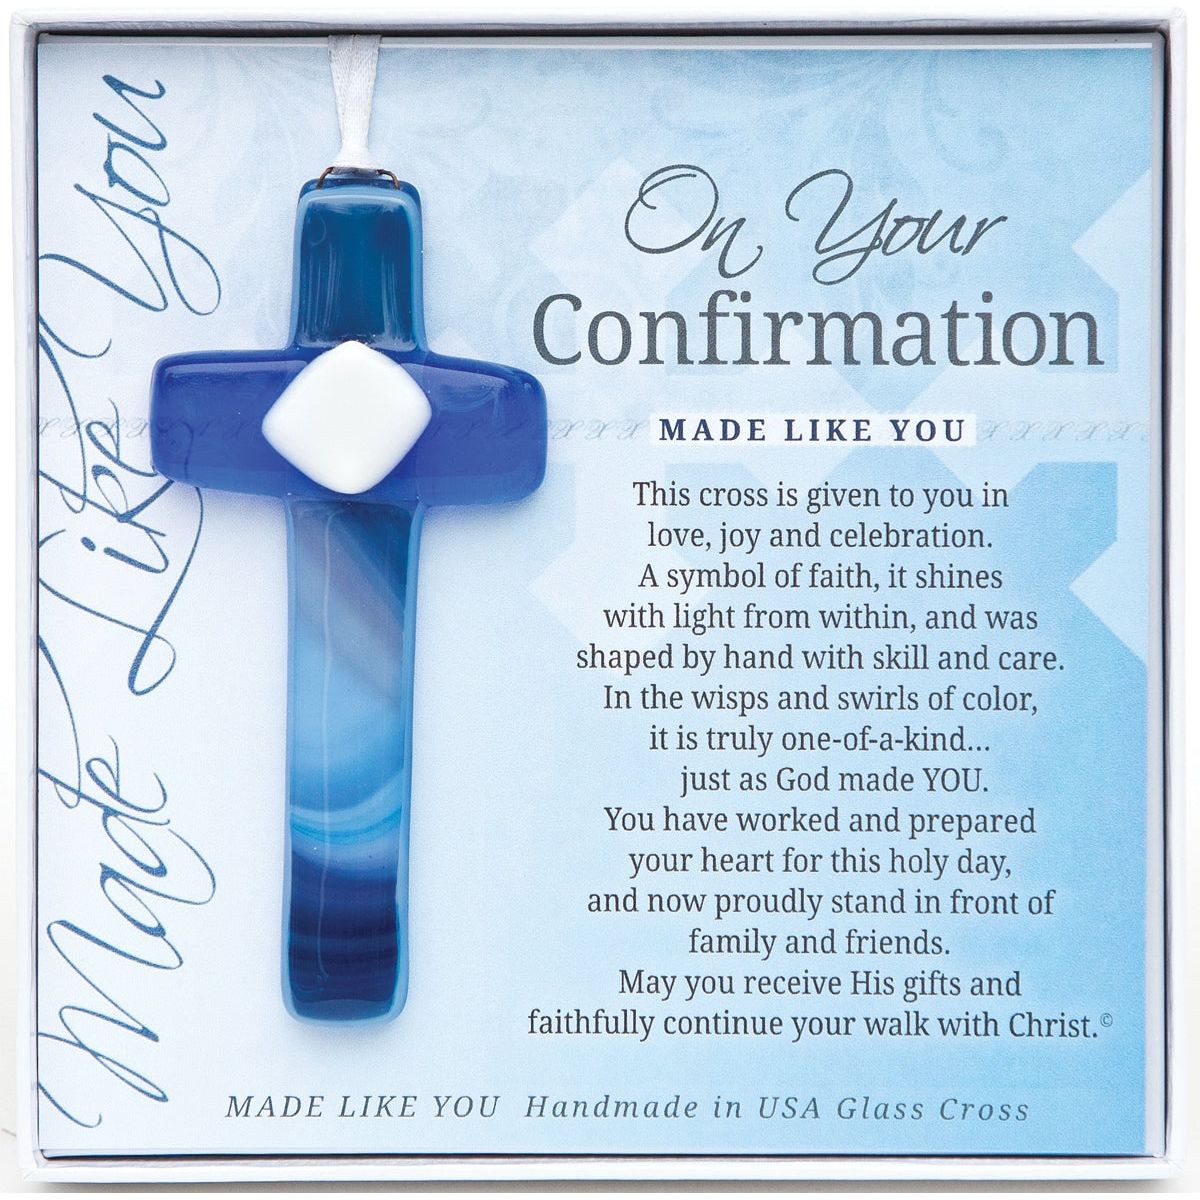 Confirmation Gift - Handmade 4" blue glass cross and "On Your Confirmation" sentiment in white box with clear lid.